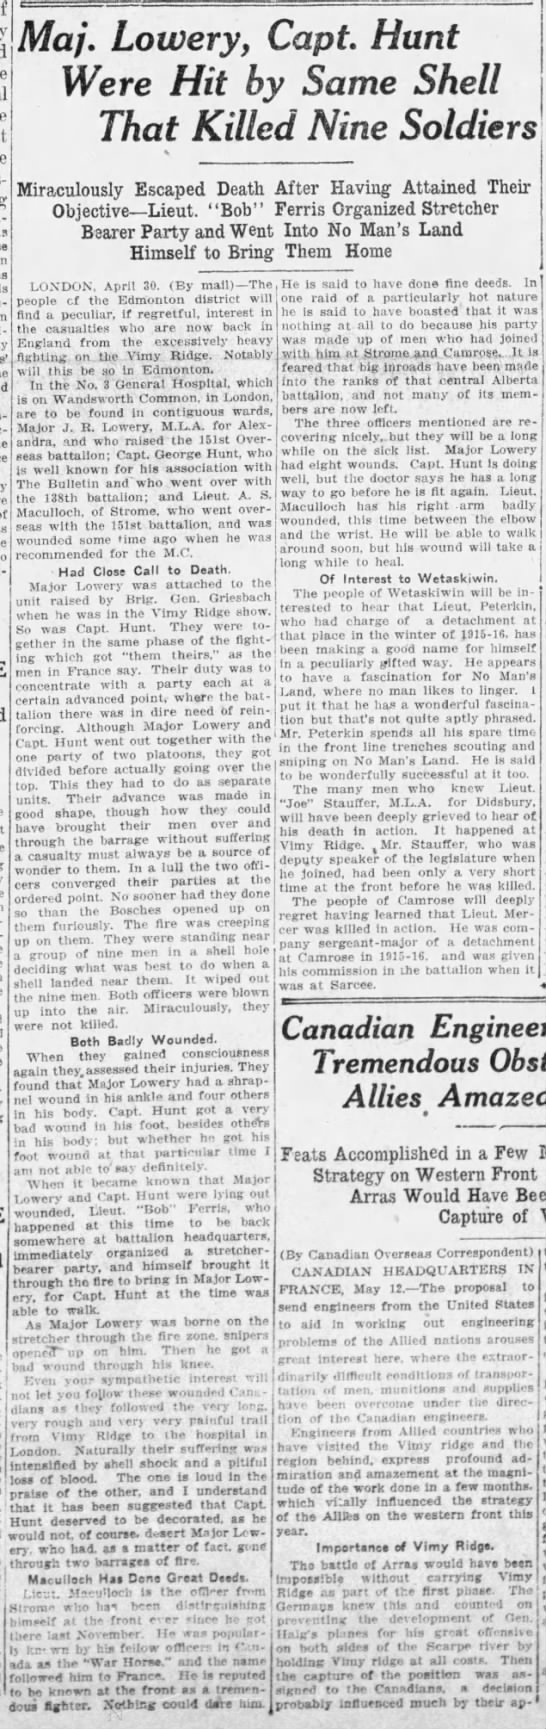 Newspaper carries news of two Canadian officers wounded at Battle of Vimy Ridge - 